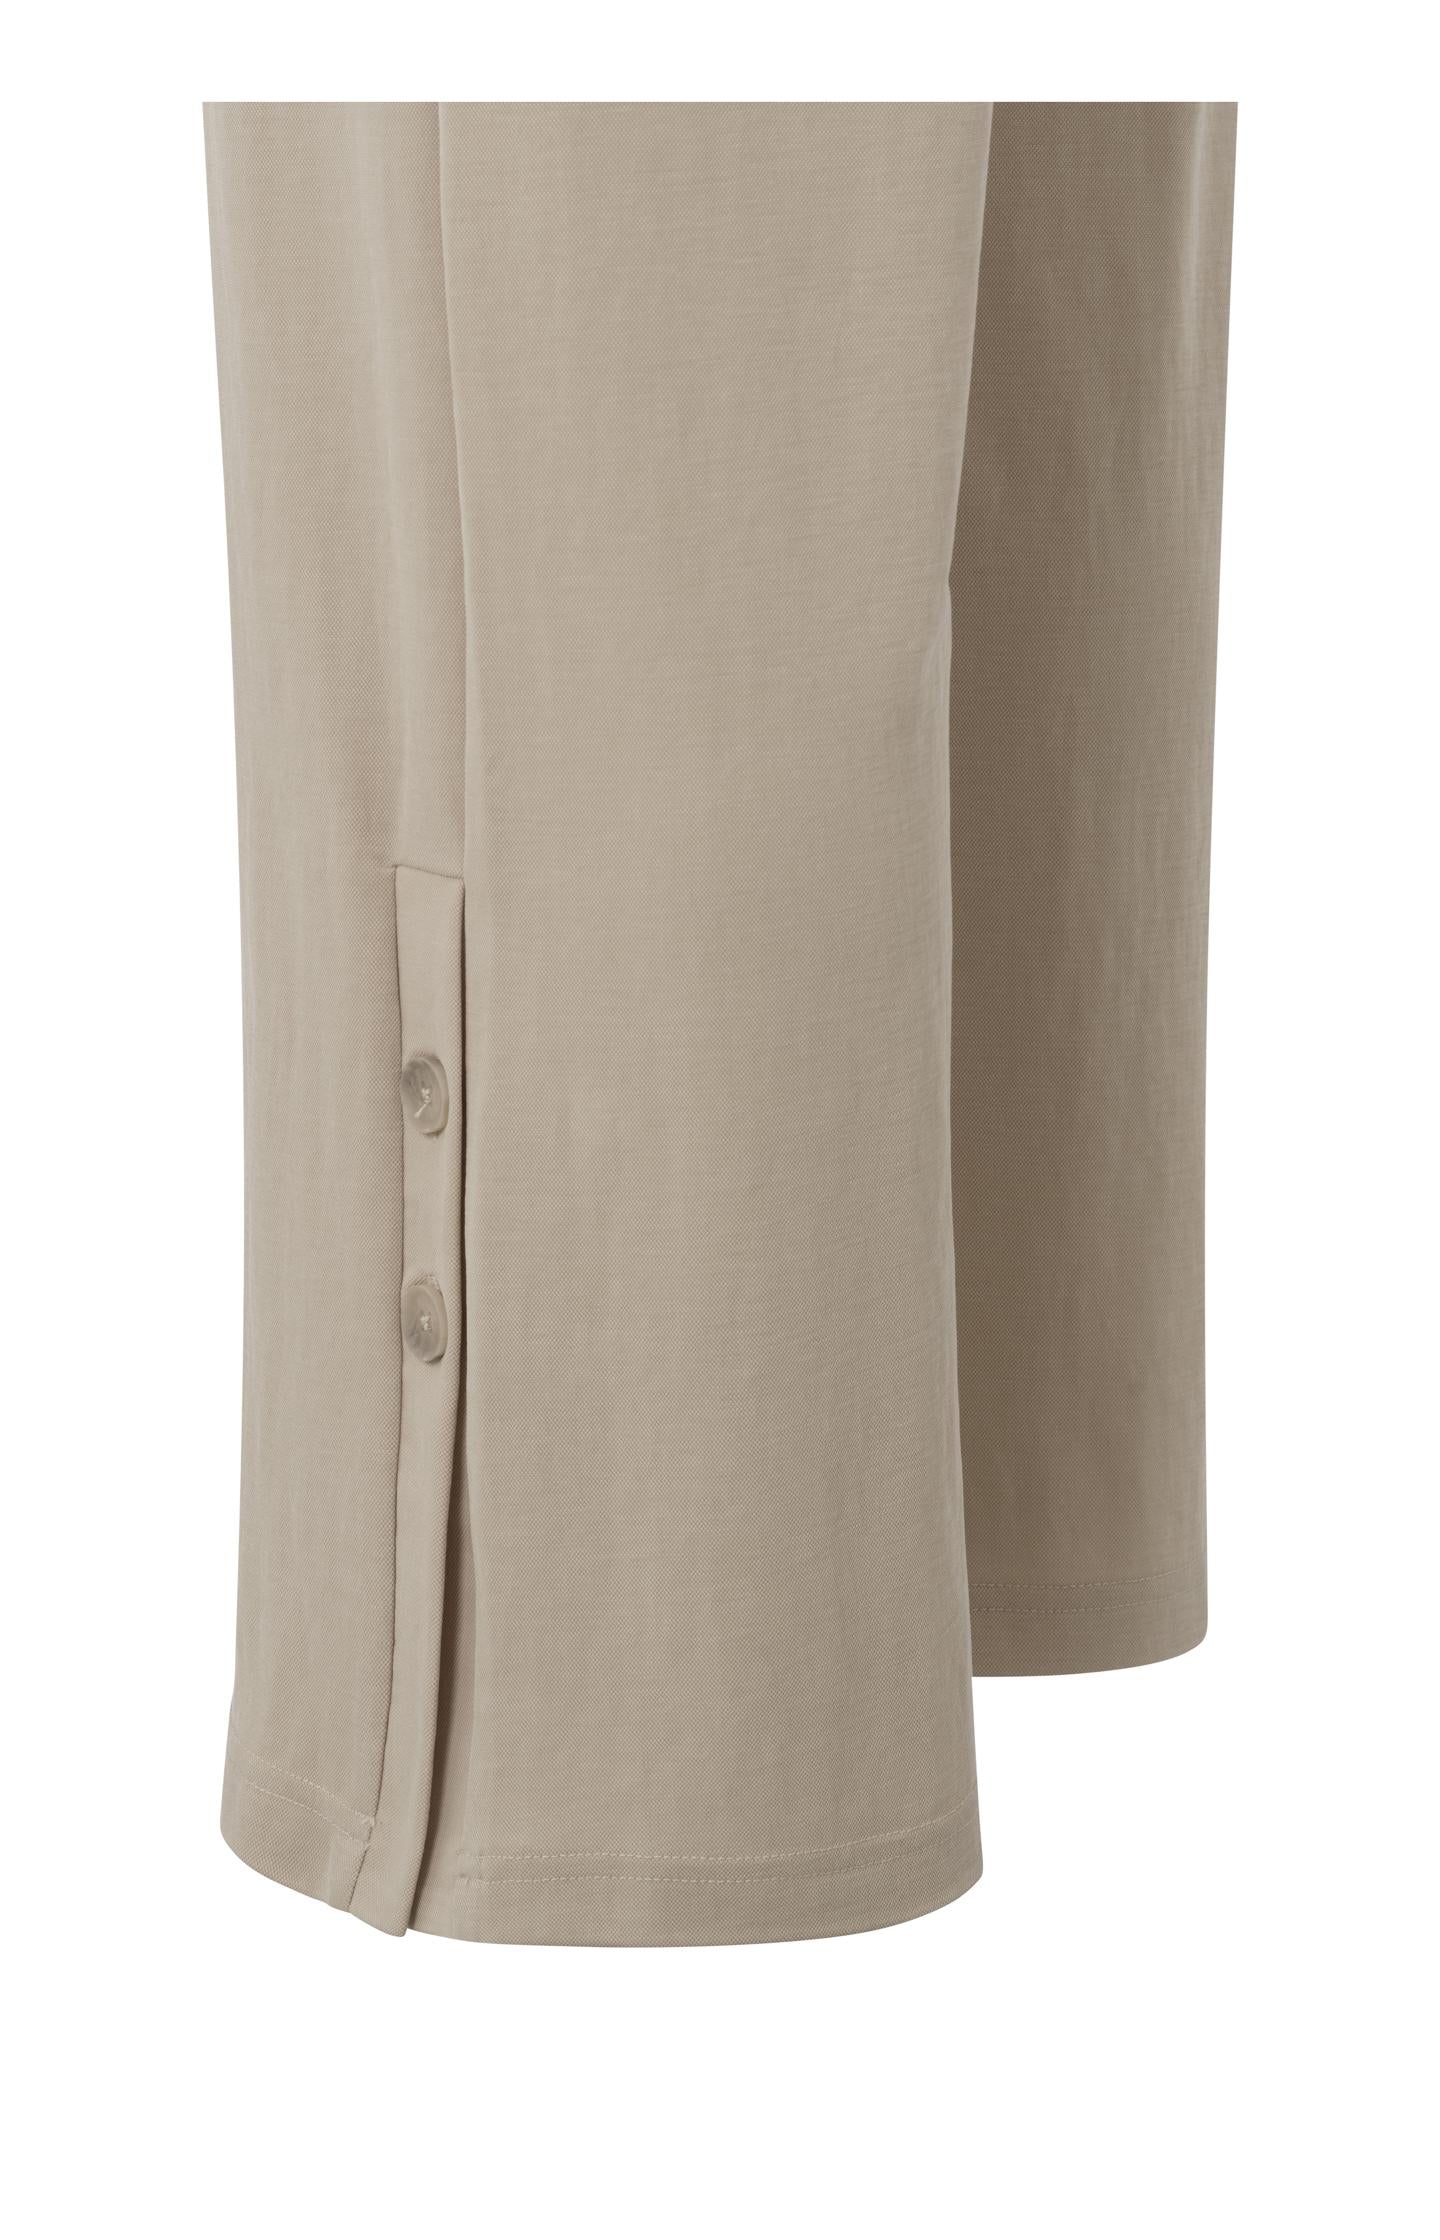 Jersey trousers with wide leg, elastic waist and buttons